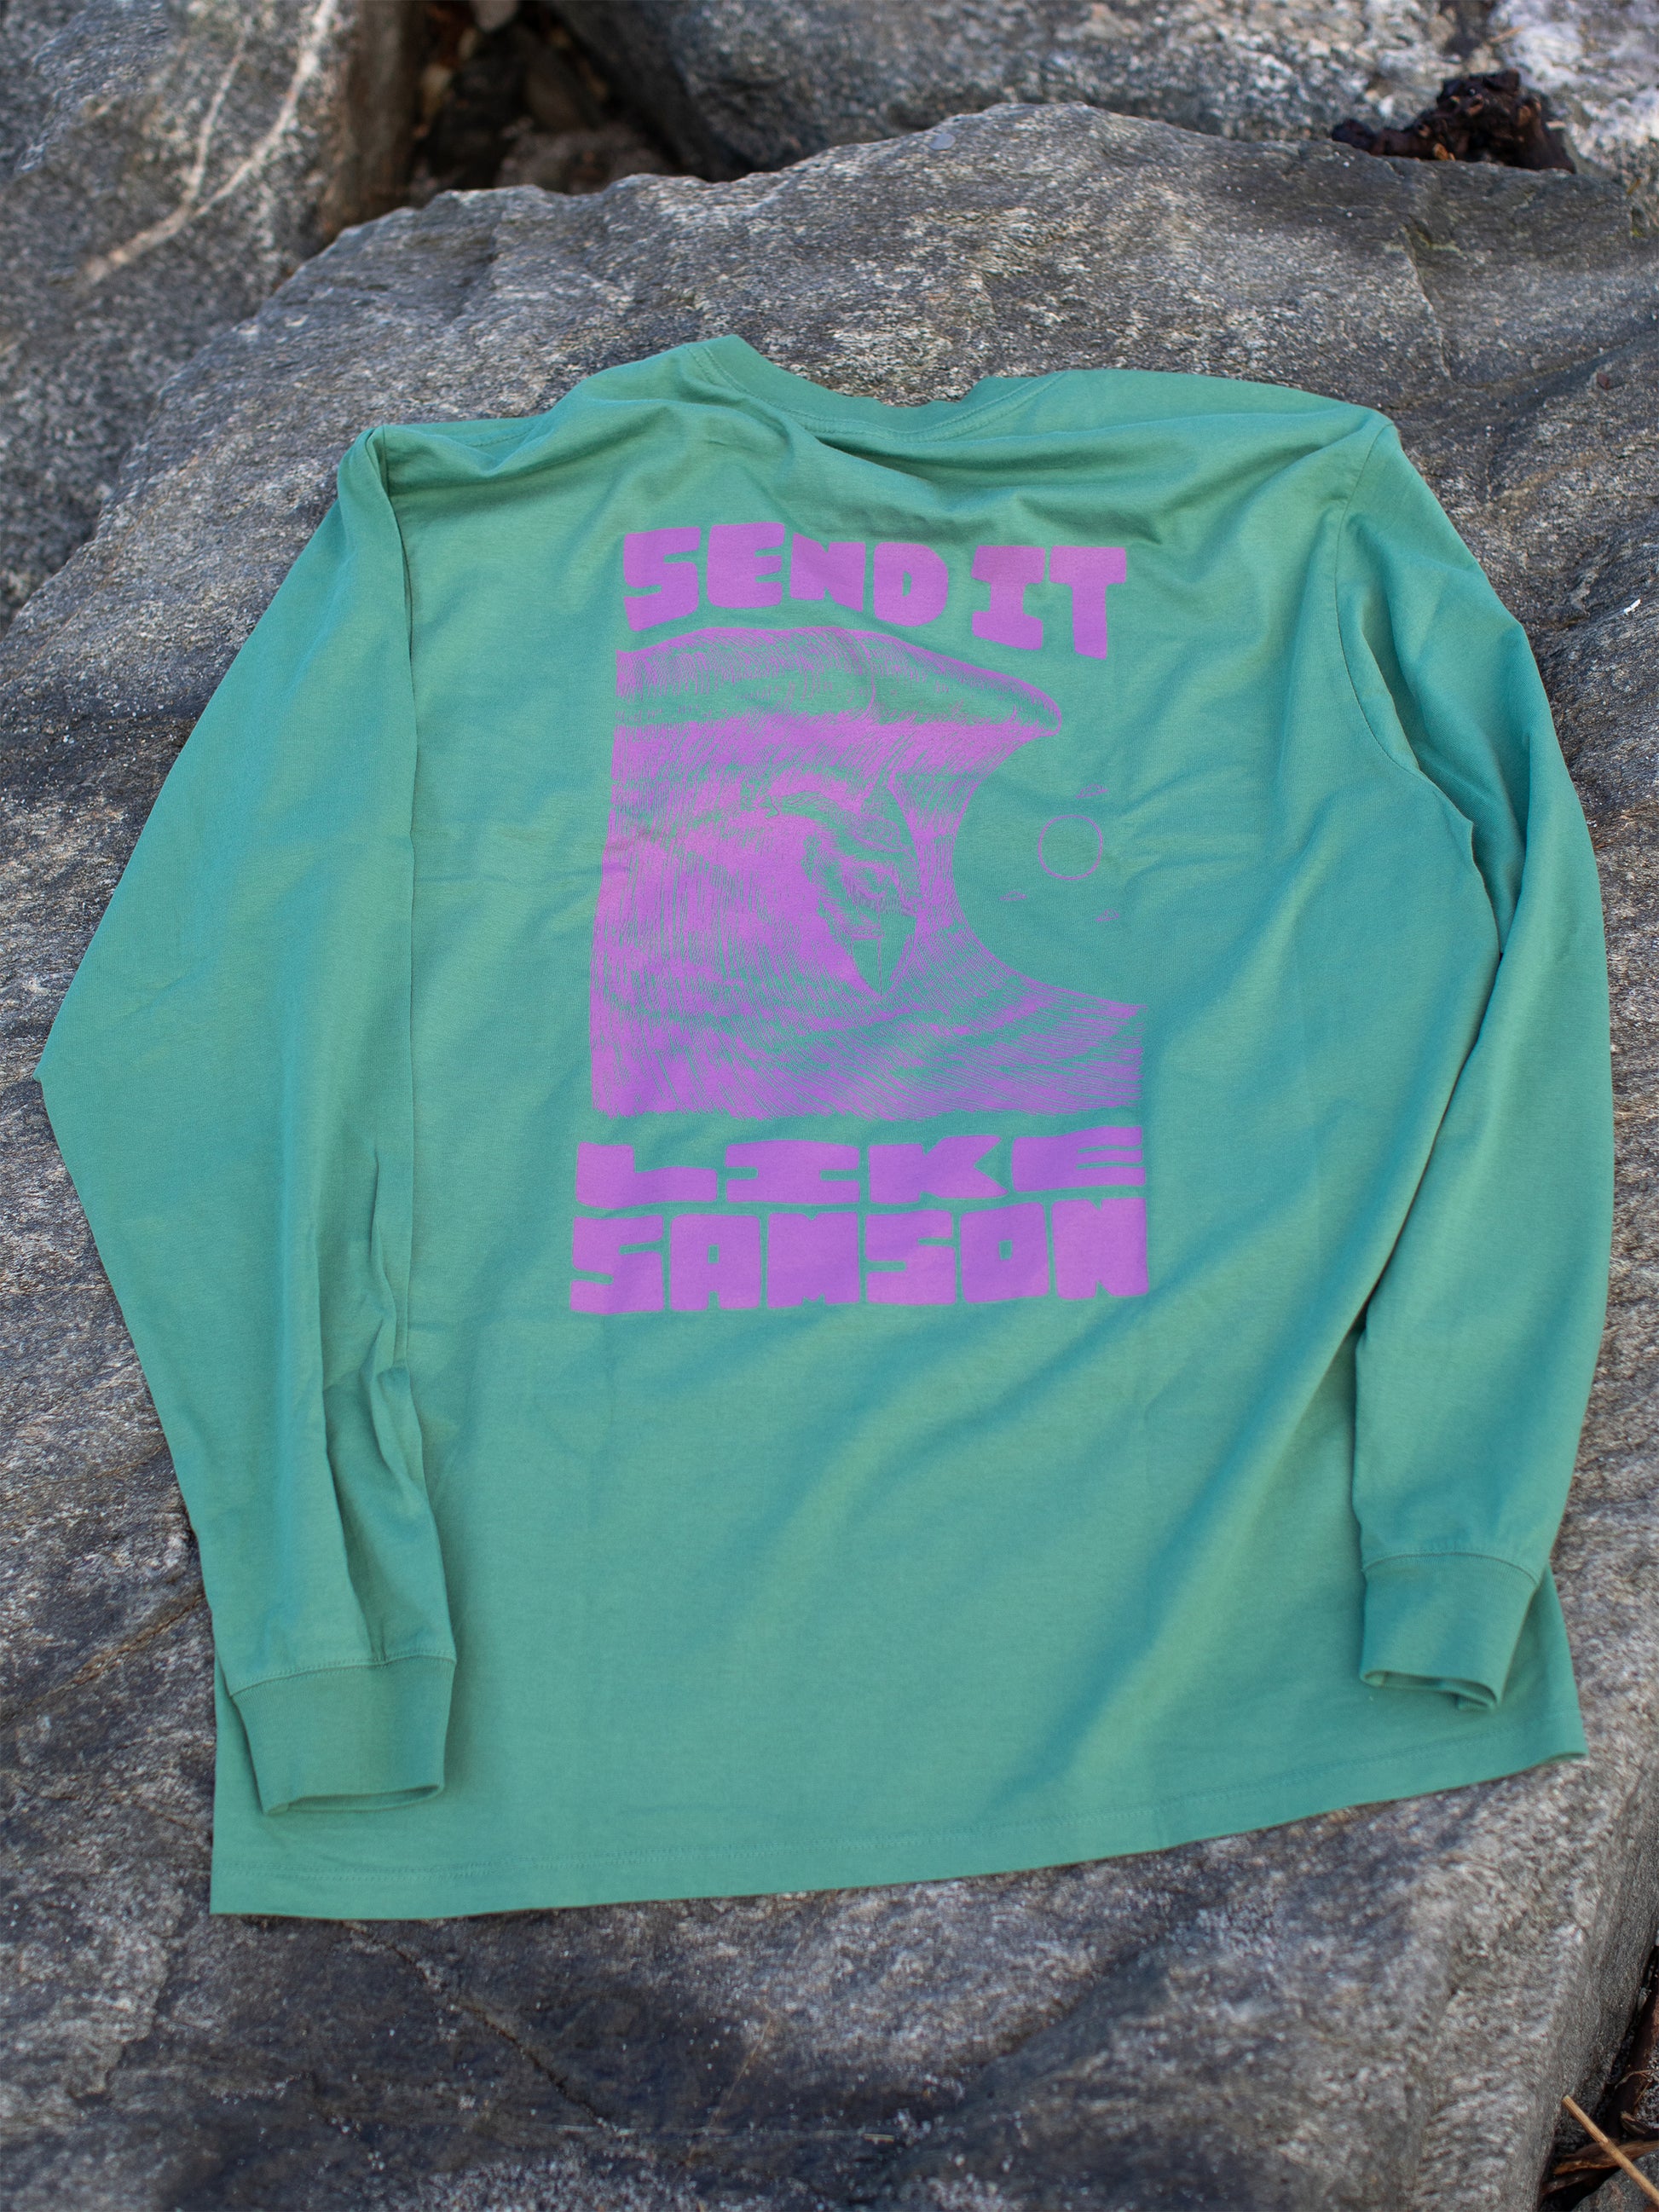 Green long sleeve t-shirt with large purple graphic in the back featuring 'SEND IT LIKE SAMSON' text and an illustration of a sasquatch riding a large wave, laid on a rocky surface.